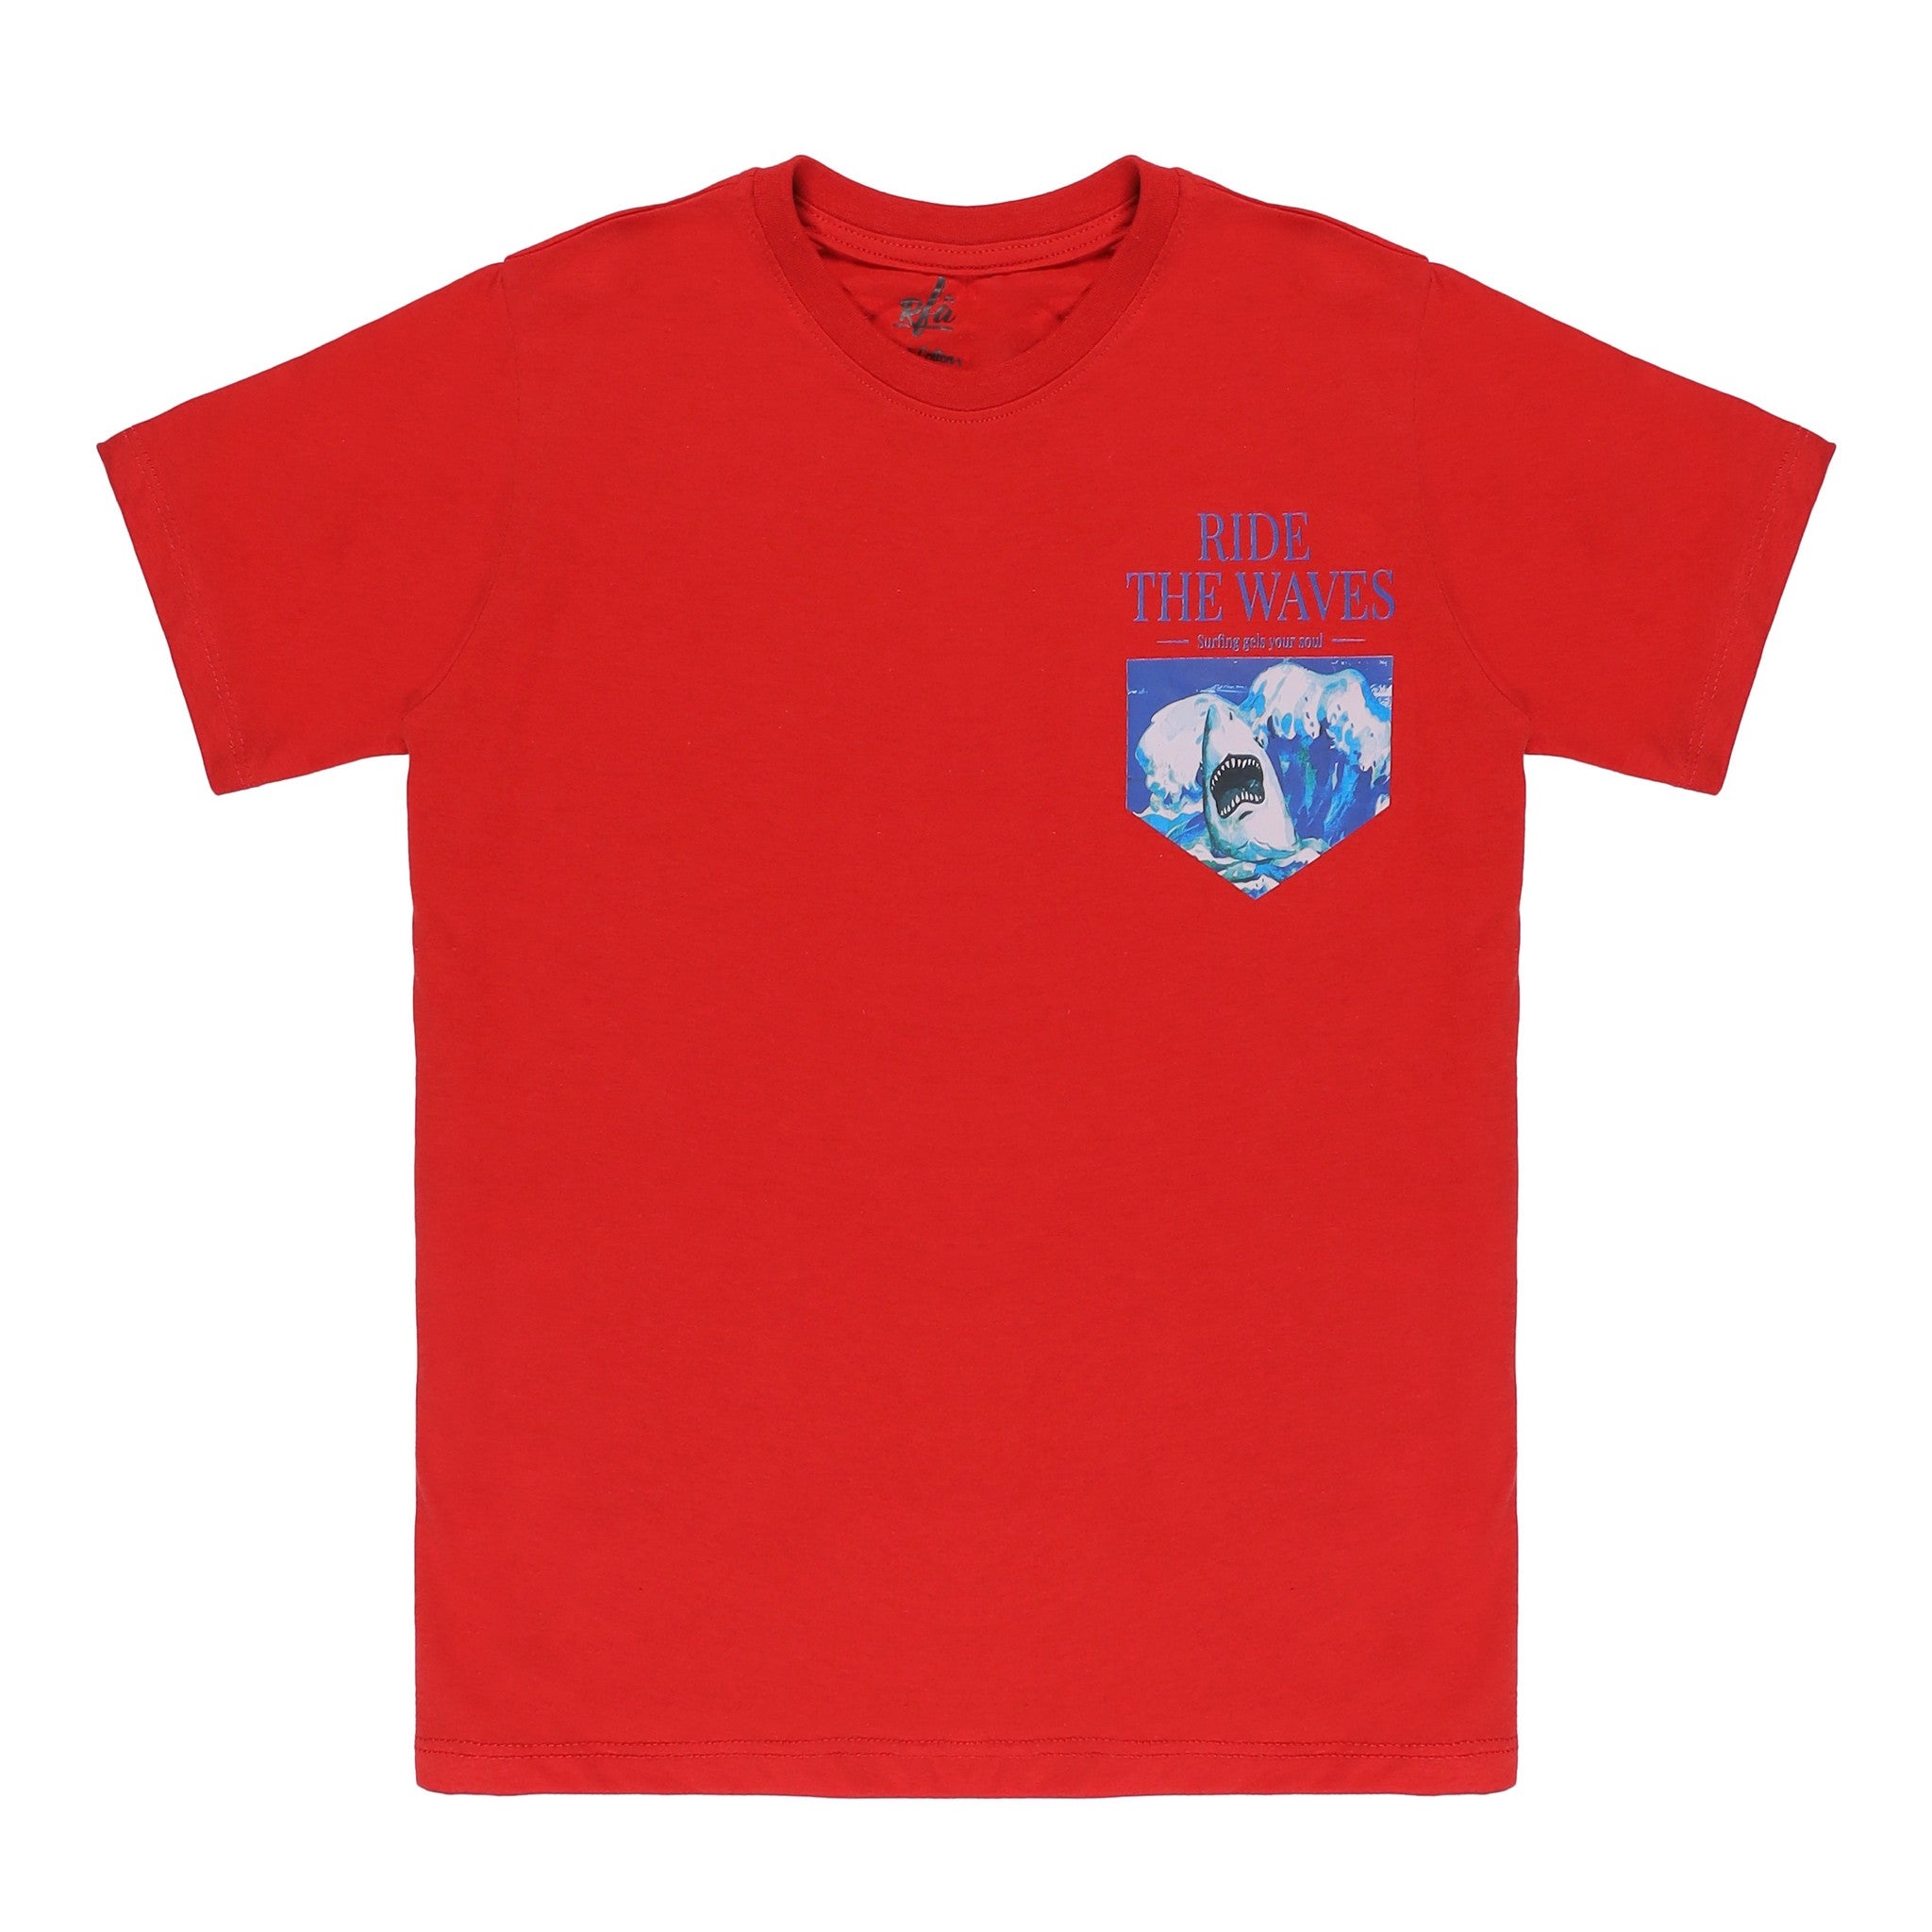 Ride The Wave Print Red T-Shirt